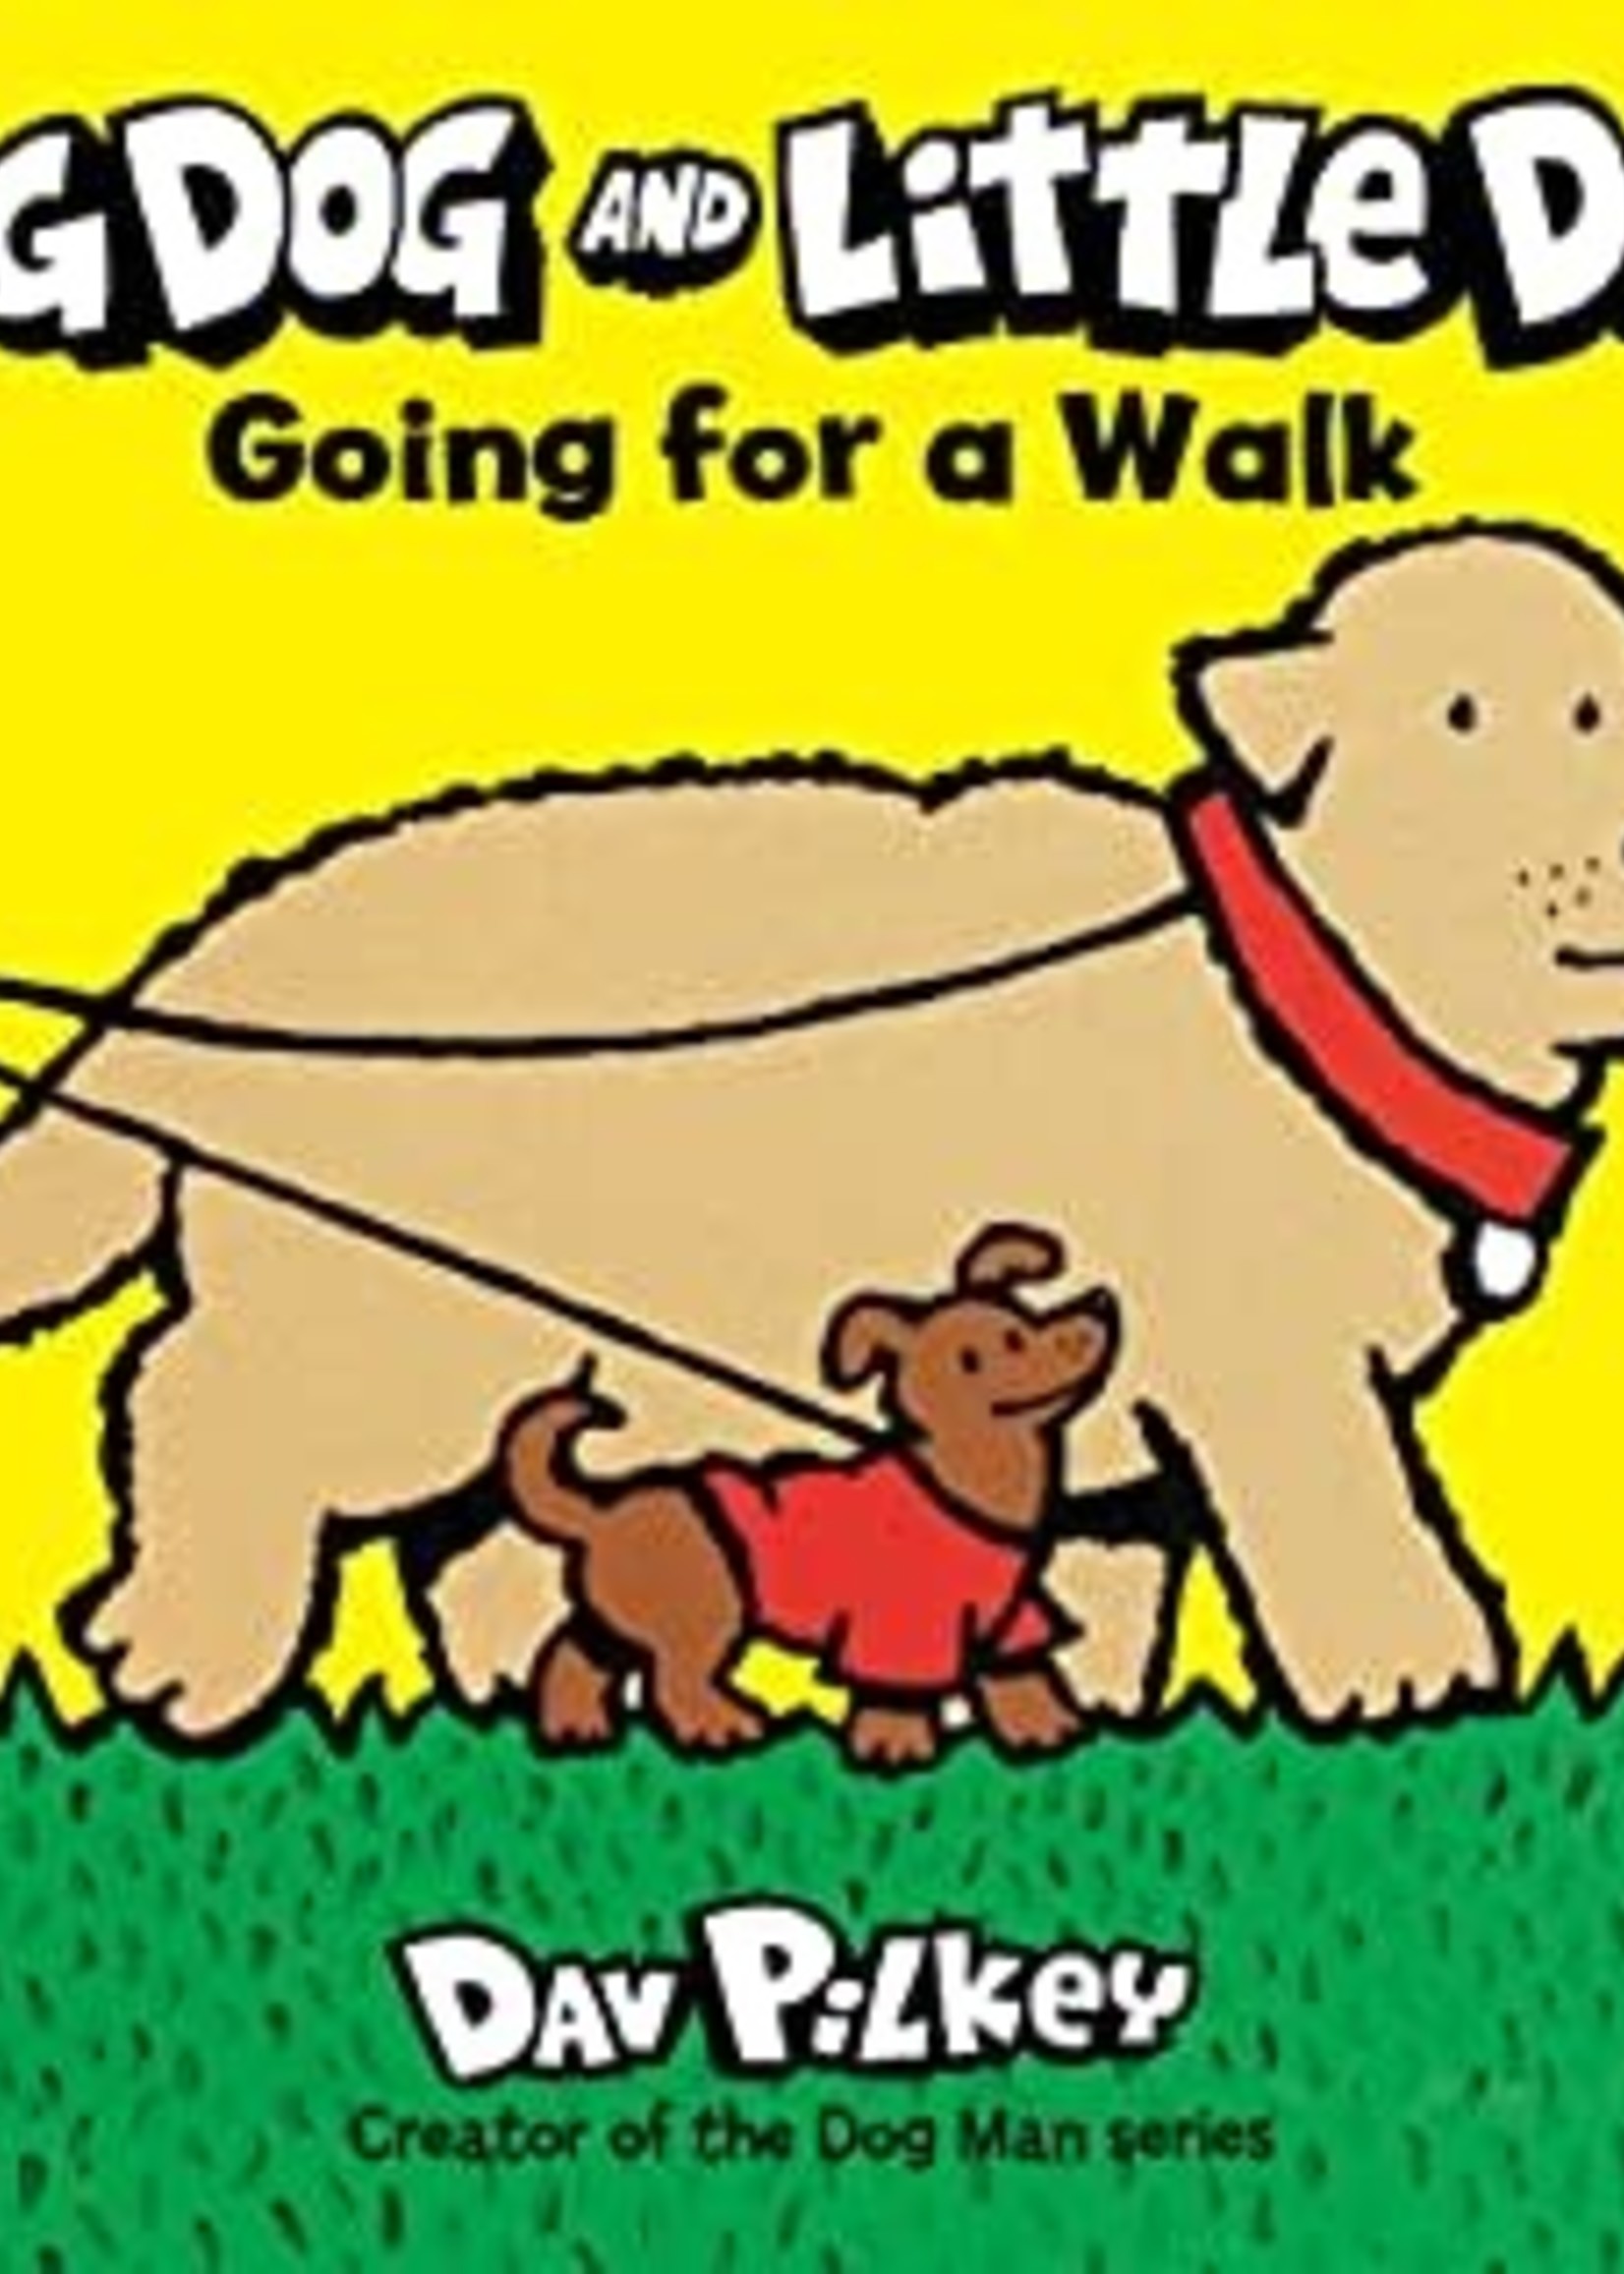 Big Dog and Little Dog Going for a Walk by Dav Pilkey